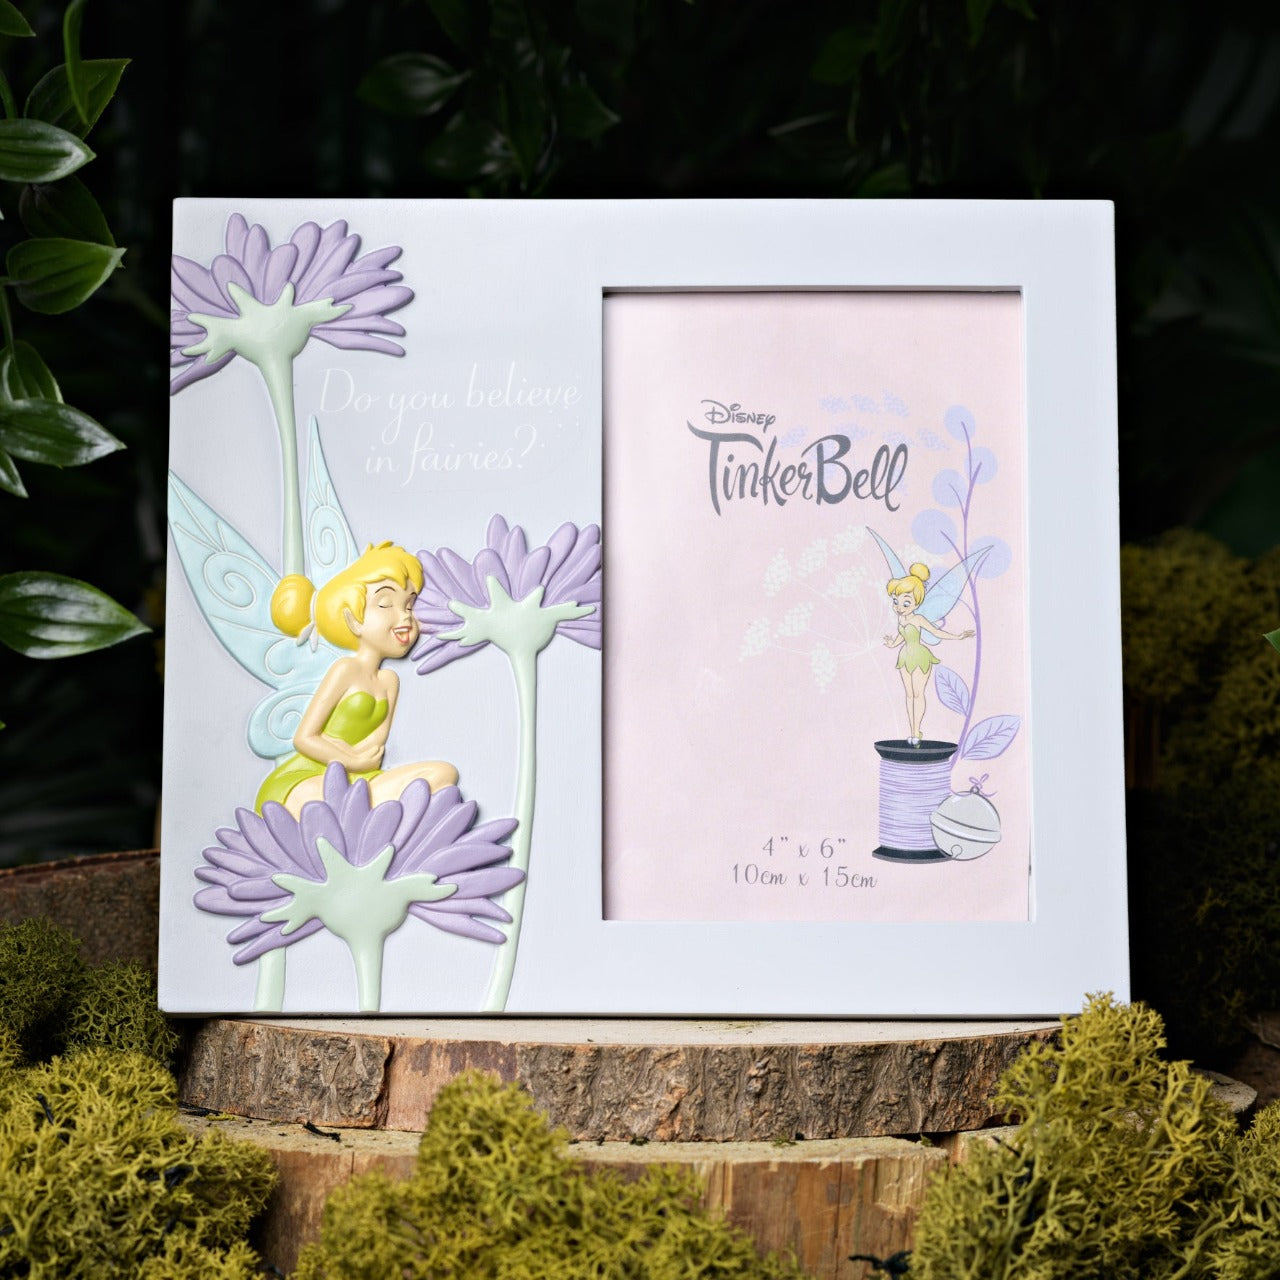 Disney Tinkerbell Photo Frame 4" x 6"  Sprinkle some Disney fairy dust over your home with this DO YOU BELIEVE IN FAIRIES? Tinkerbell 3D relief resin photo frame with a 4" x 6" aperture.